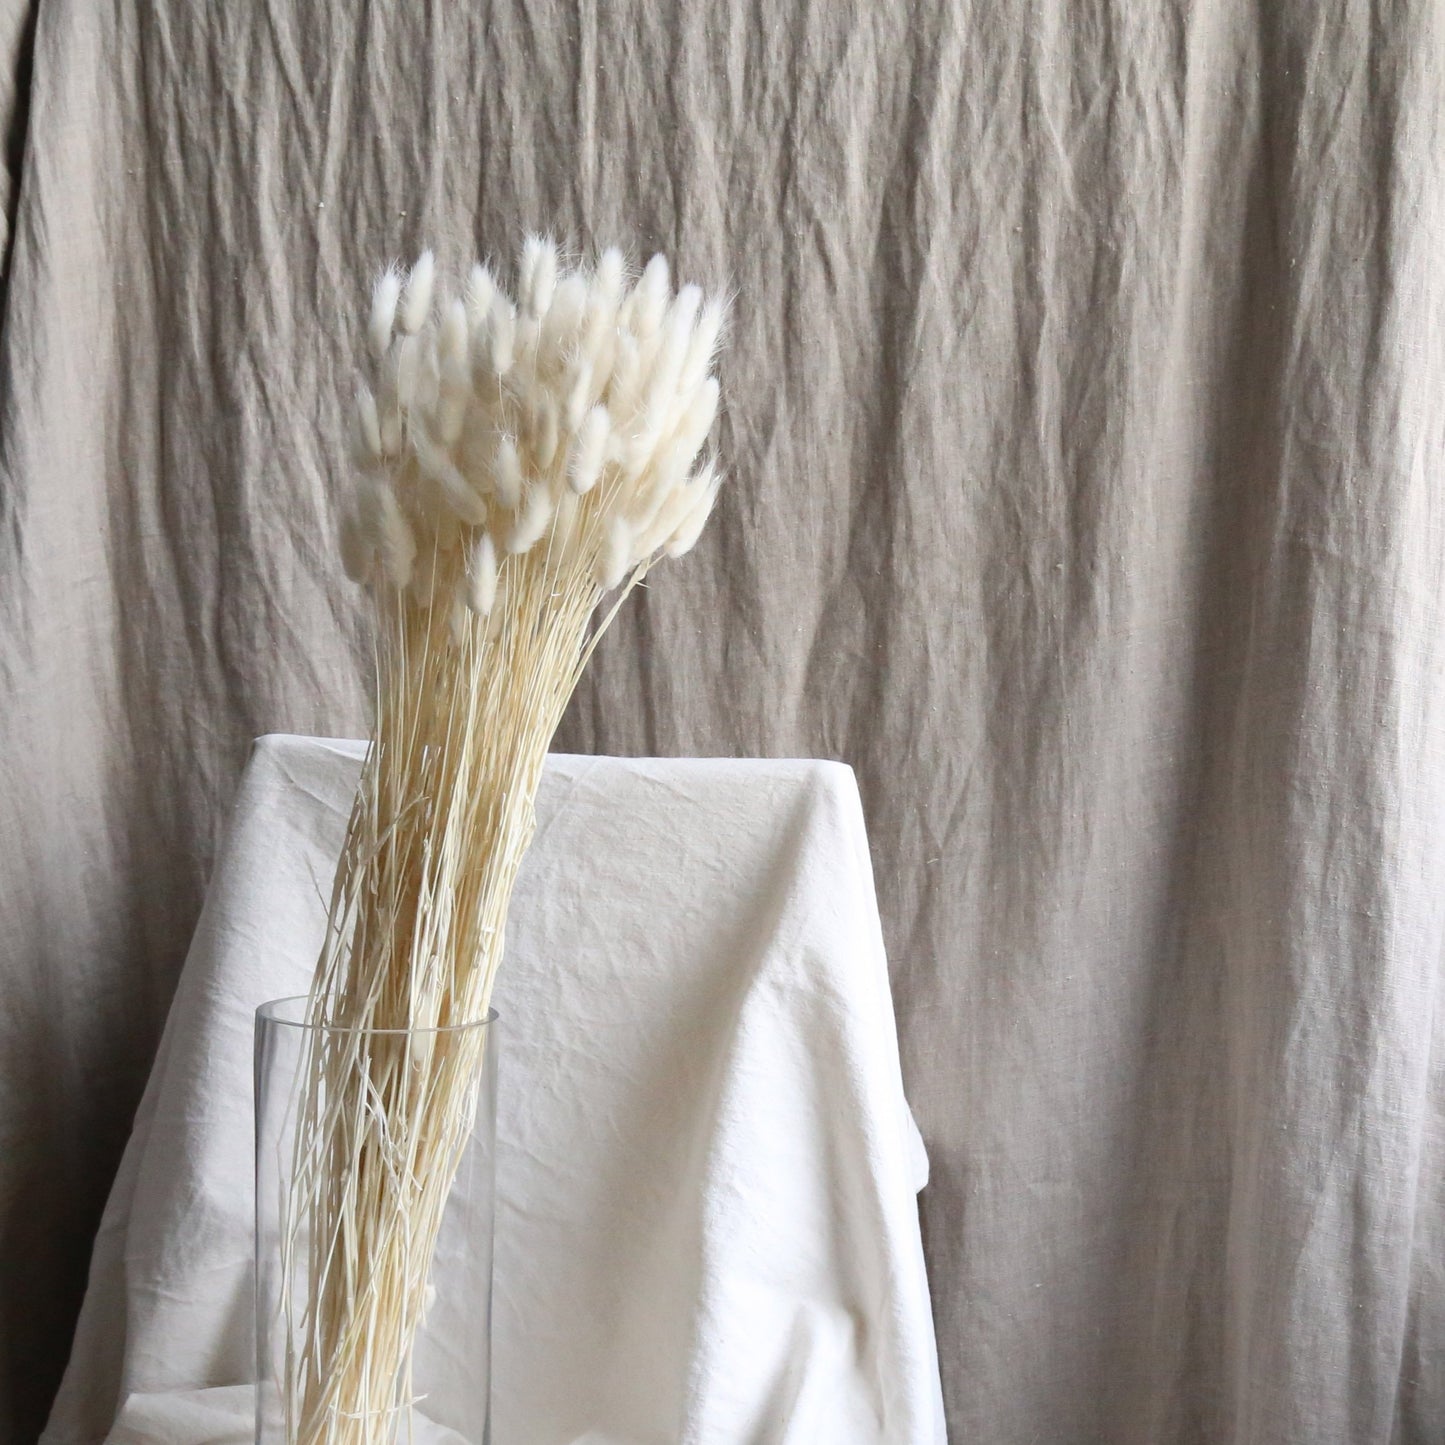 Dried white bunny tail grass available at Rook & Rose.